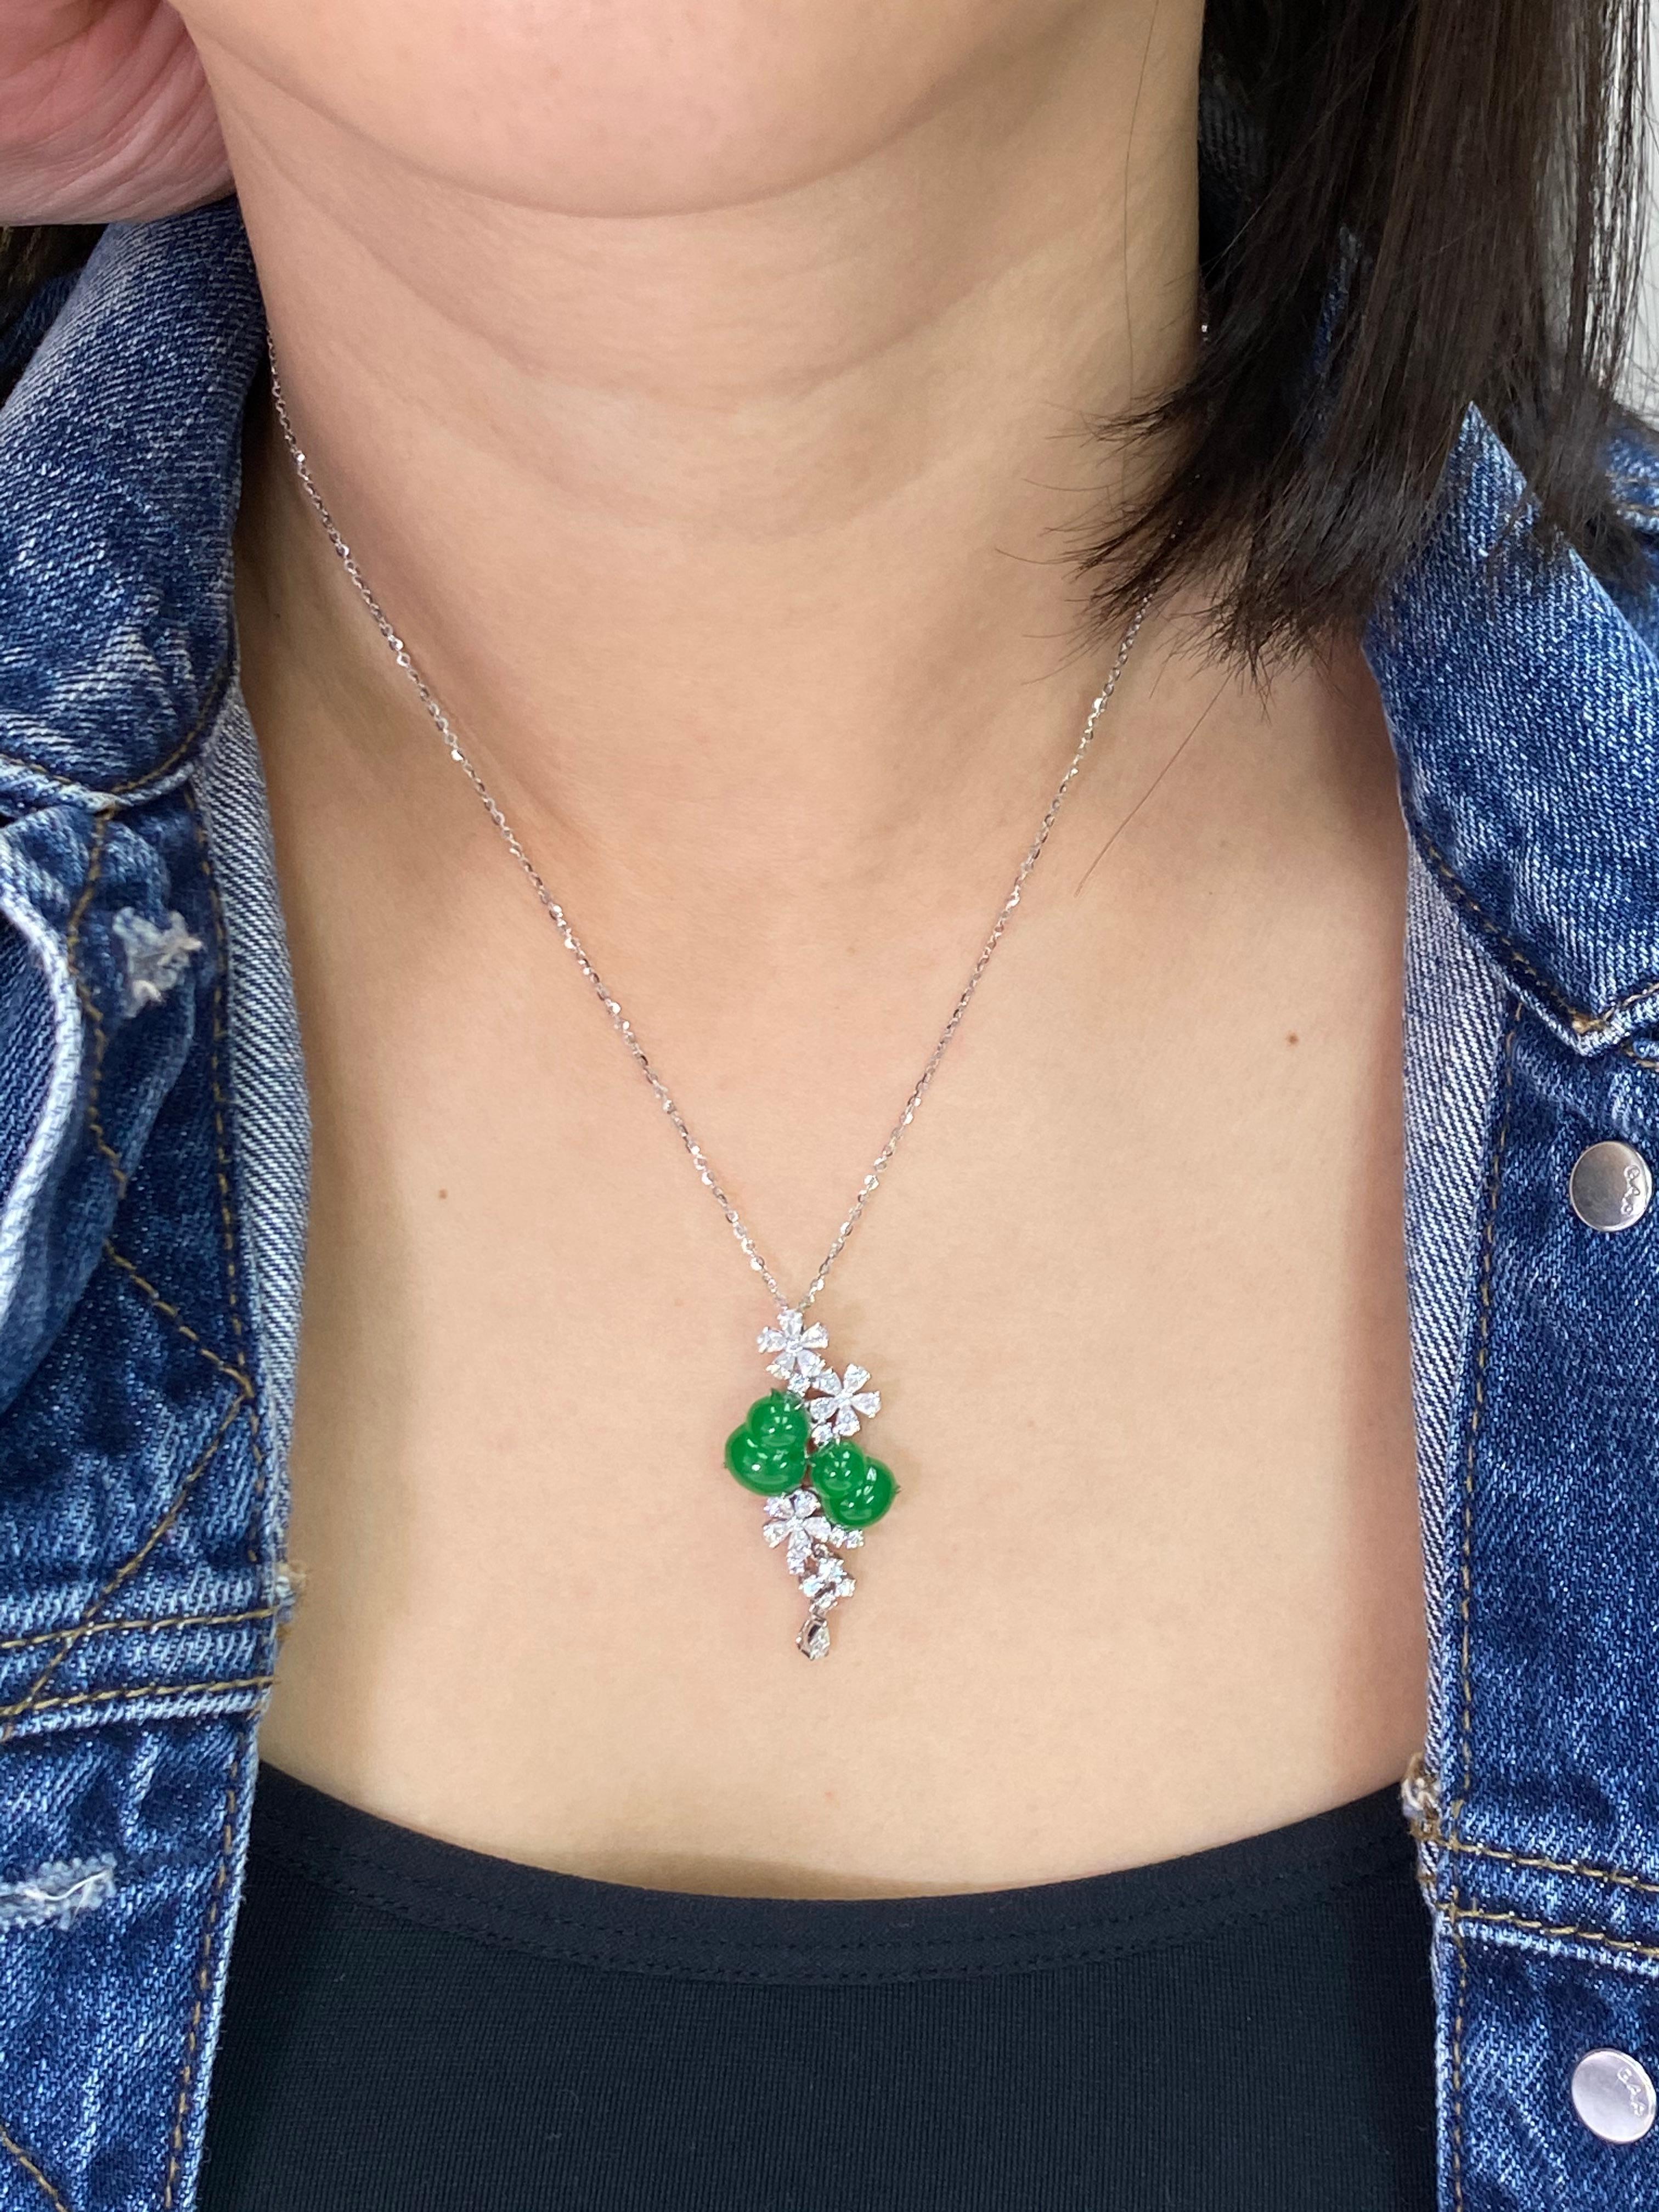 Please check out the HD video! Here is a natural icy Jadeite Jade and diamond pendant with excellent intense apple green color. This color borderline the best imperial green color (we are being very conservative).  It is certified by 2 different